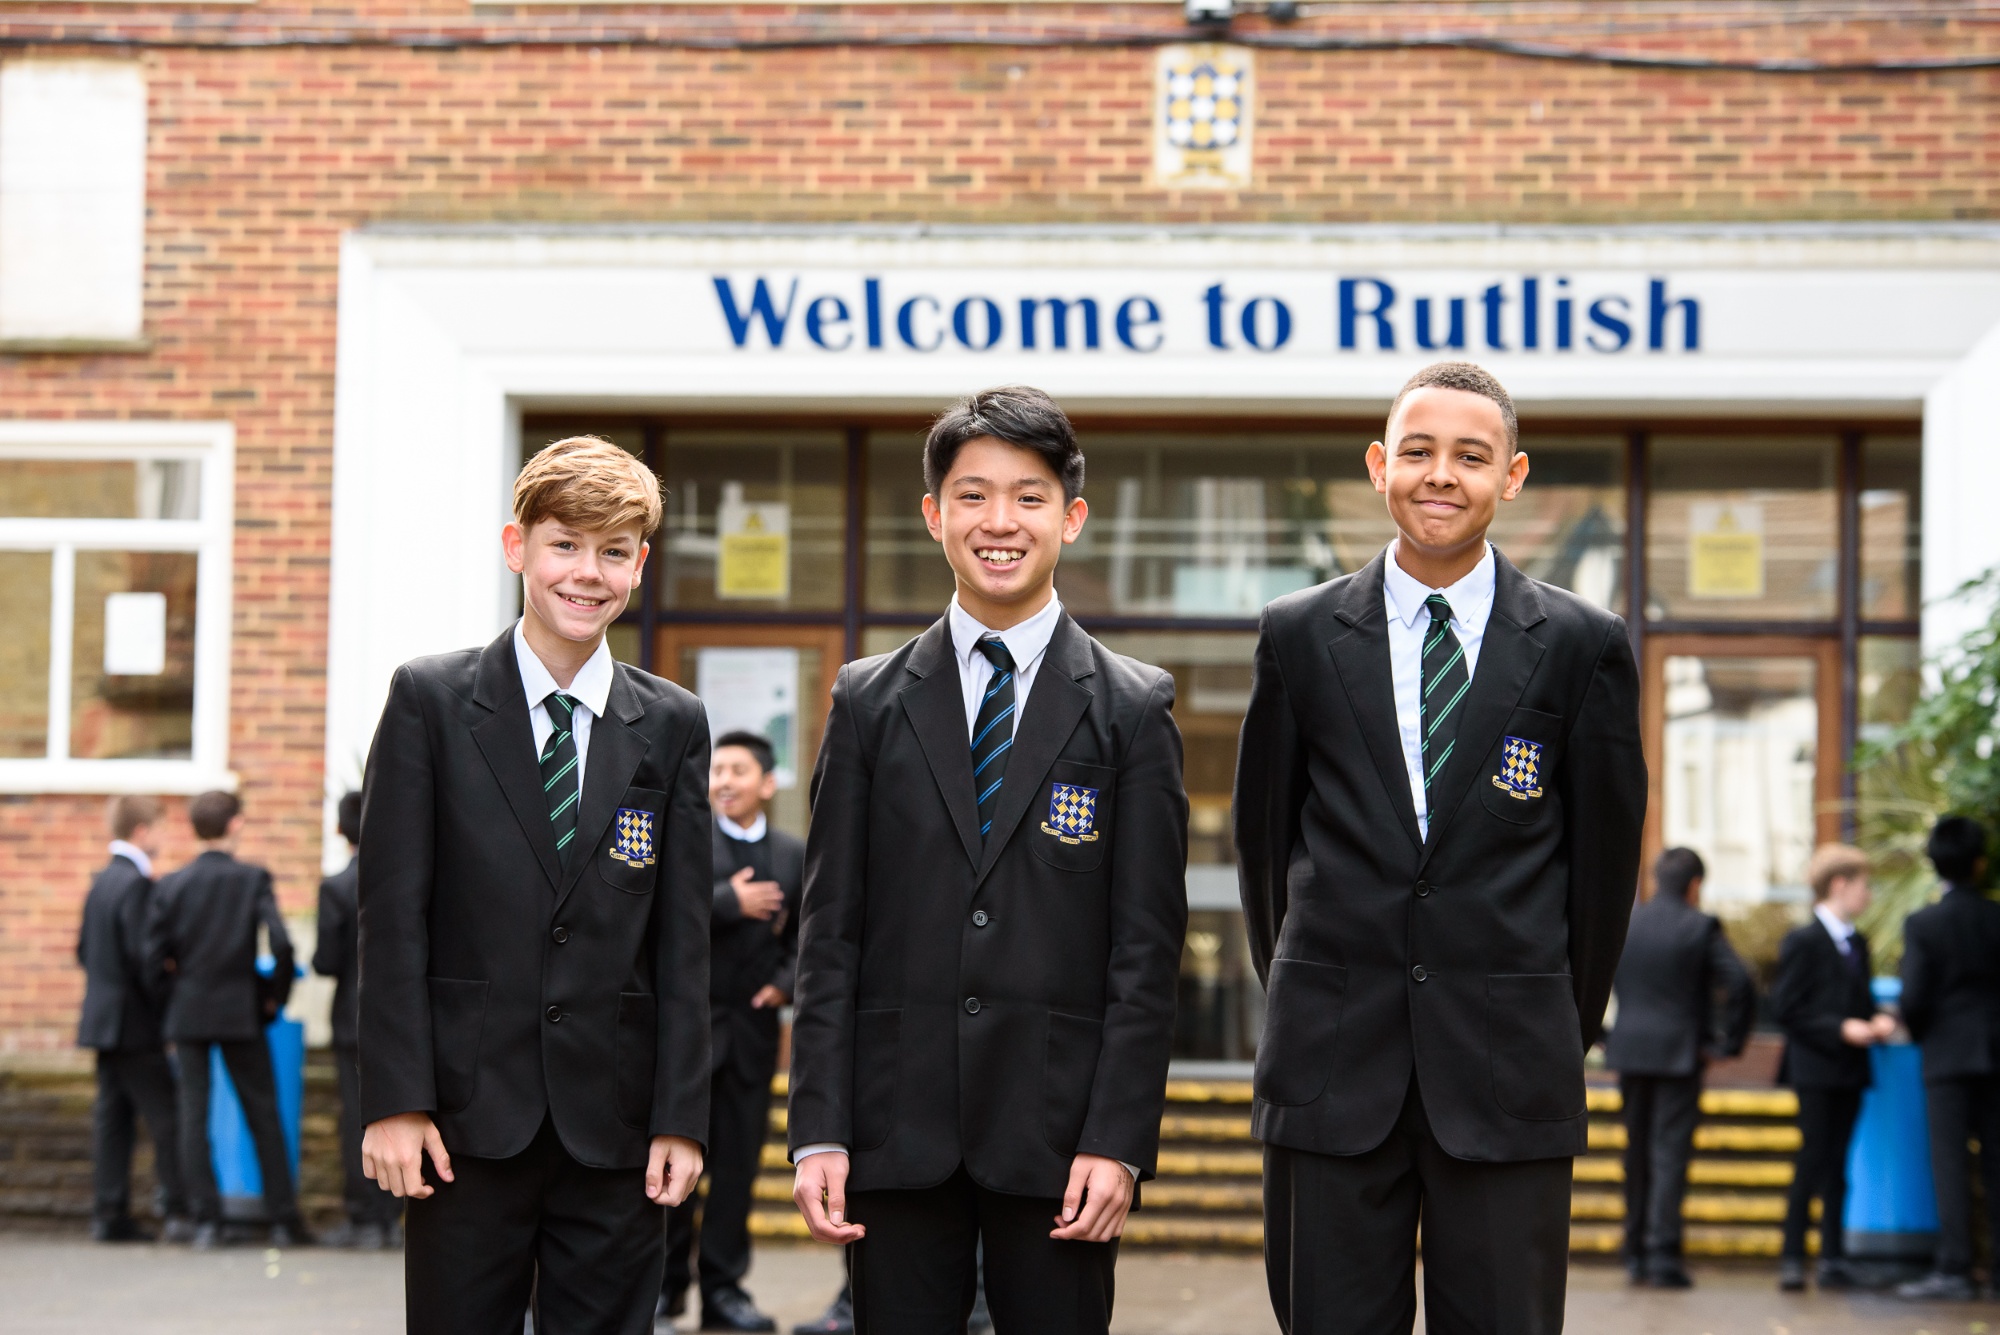 Rutlish students standing under the Welcome to Rutlish sign